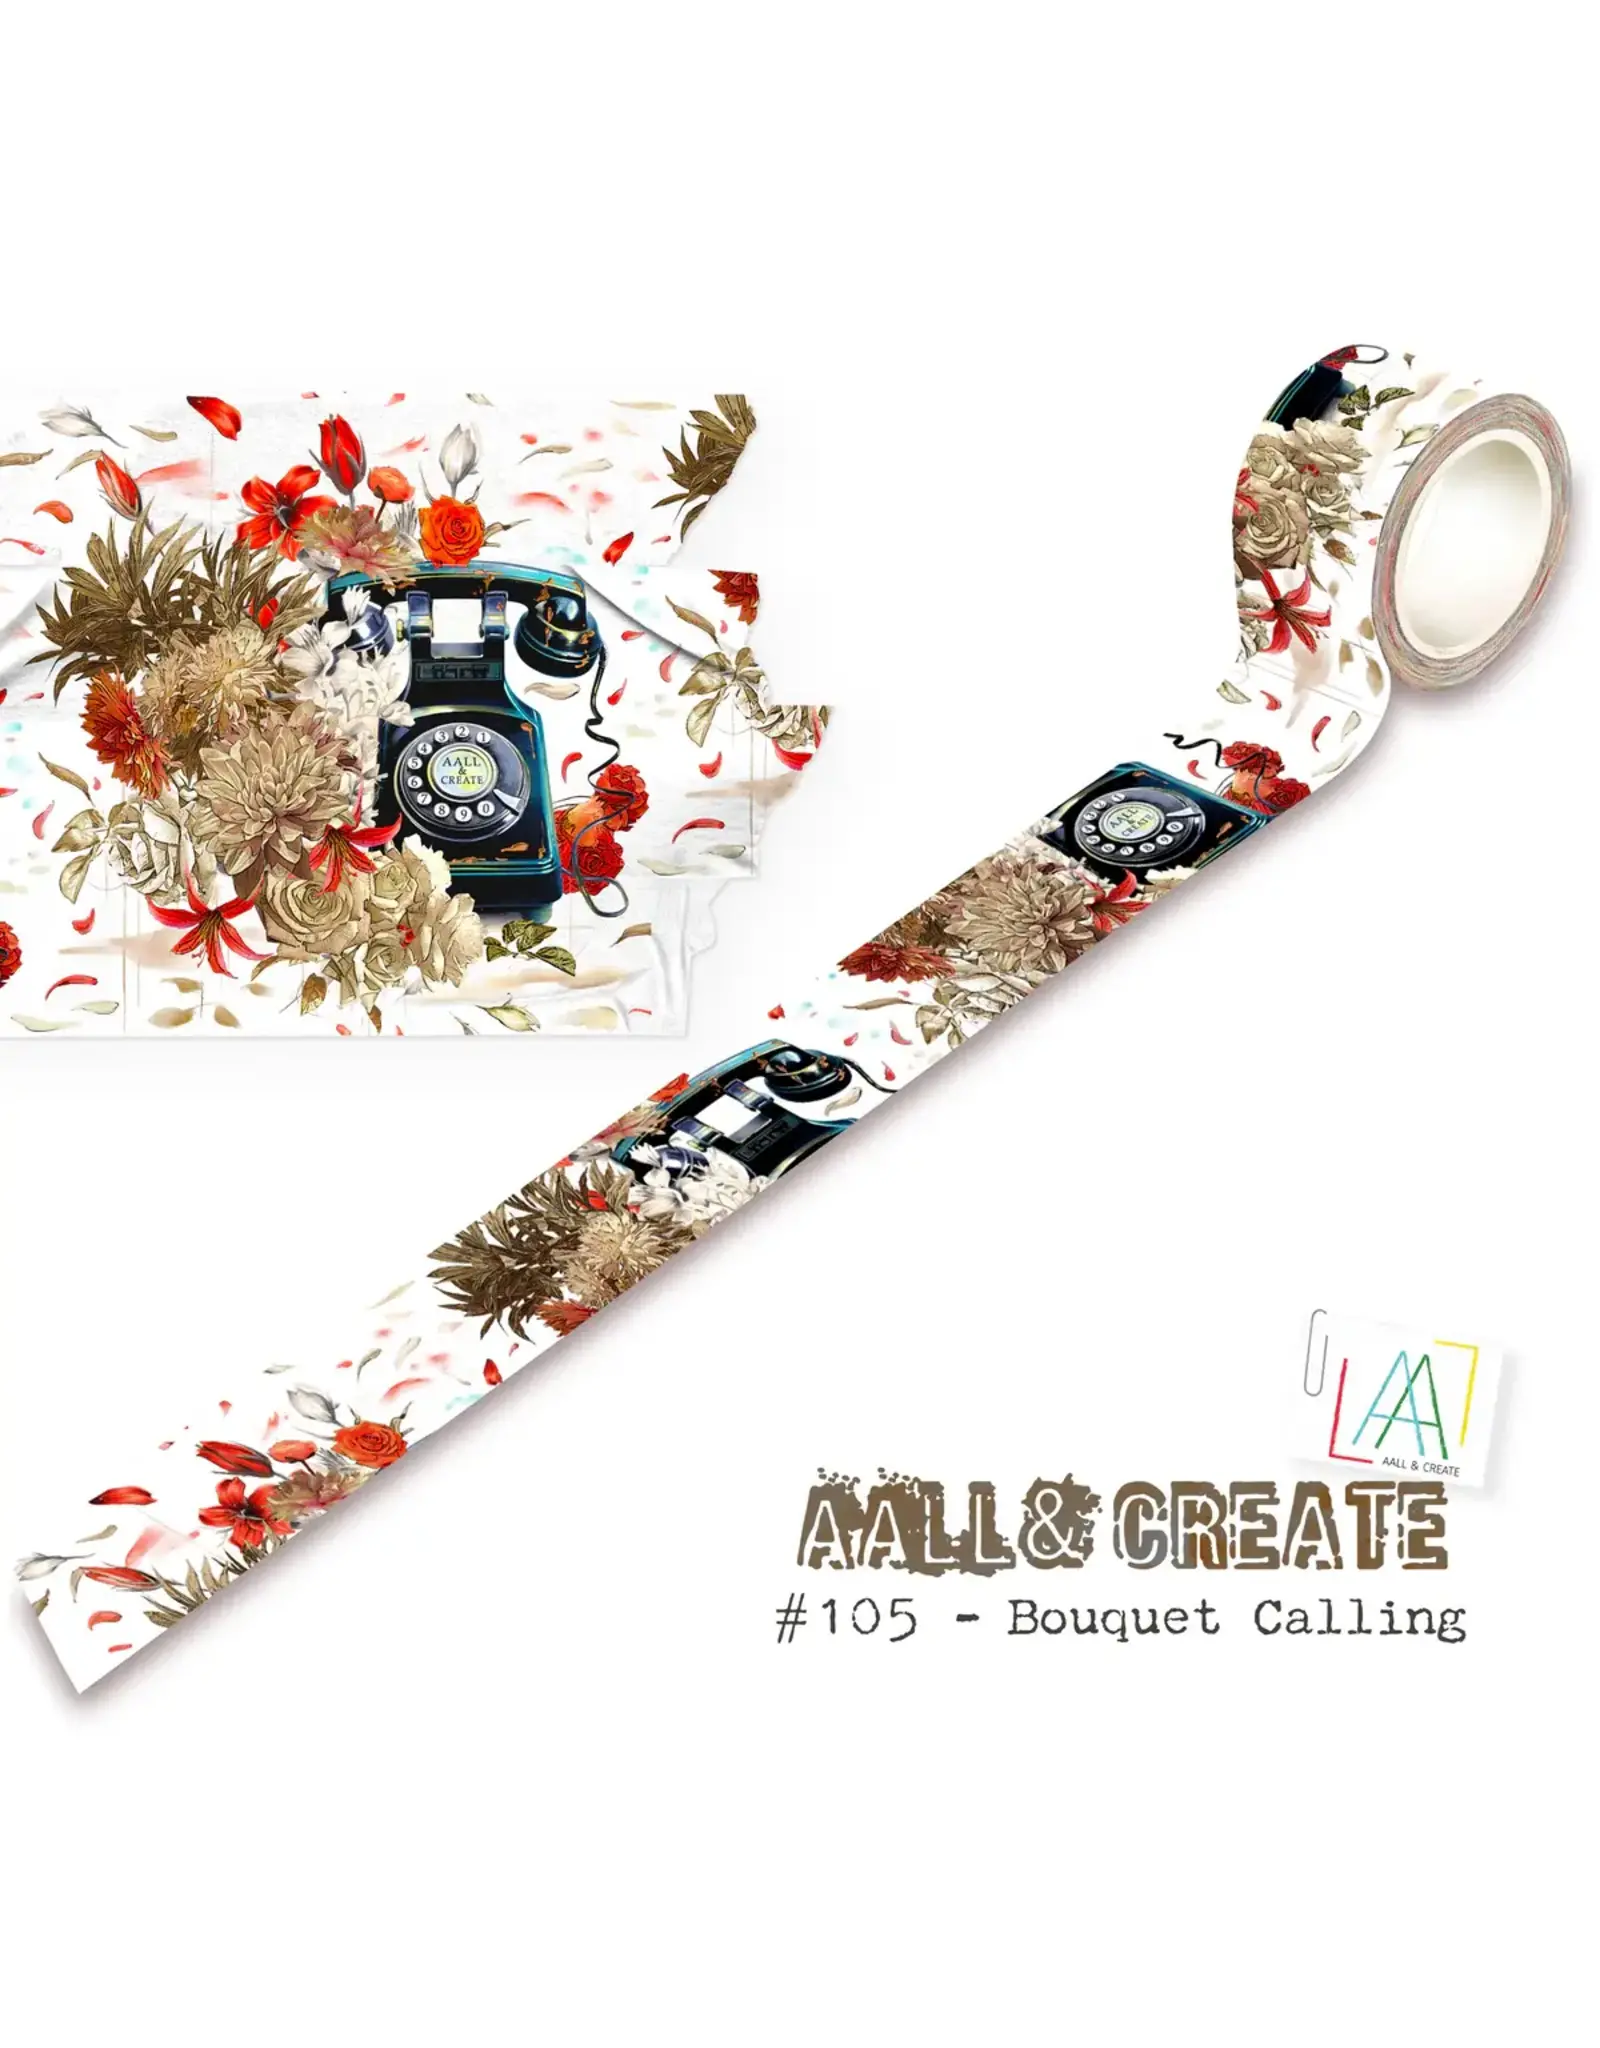 AALL & CREATE AALL & CREATE AUTOUR DE MWA ##105 BOUQUET CALLING LAYER IT UP! WASHI TAPE